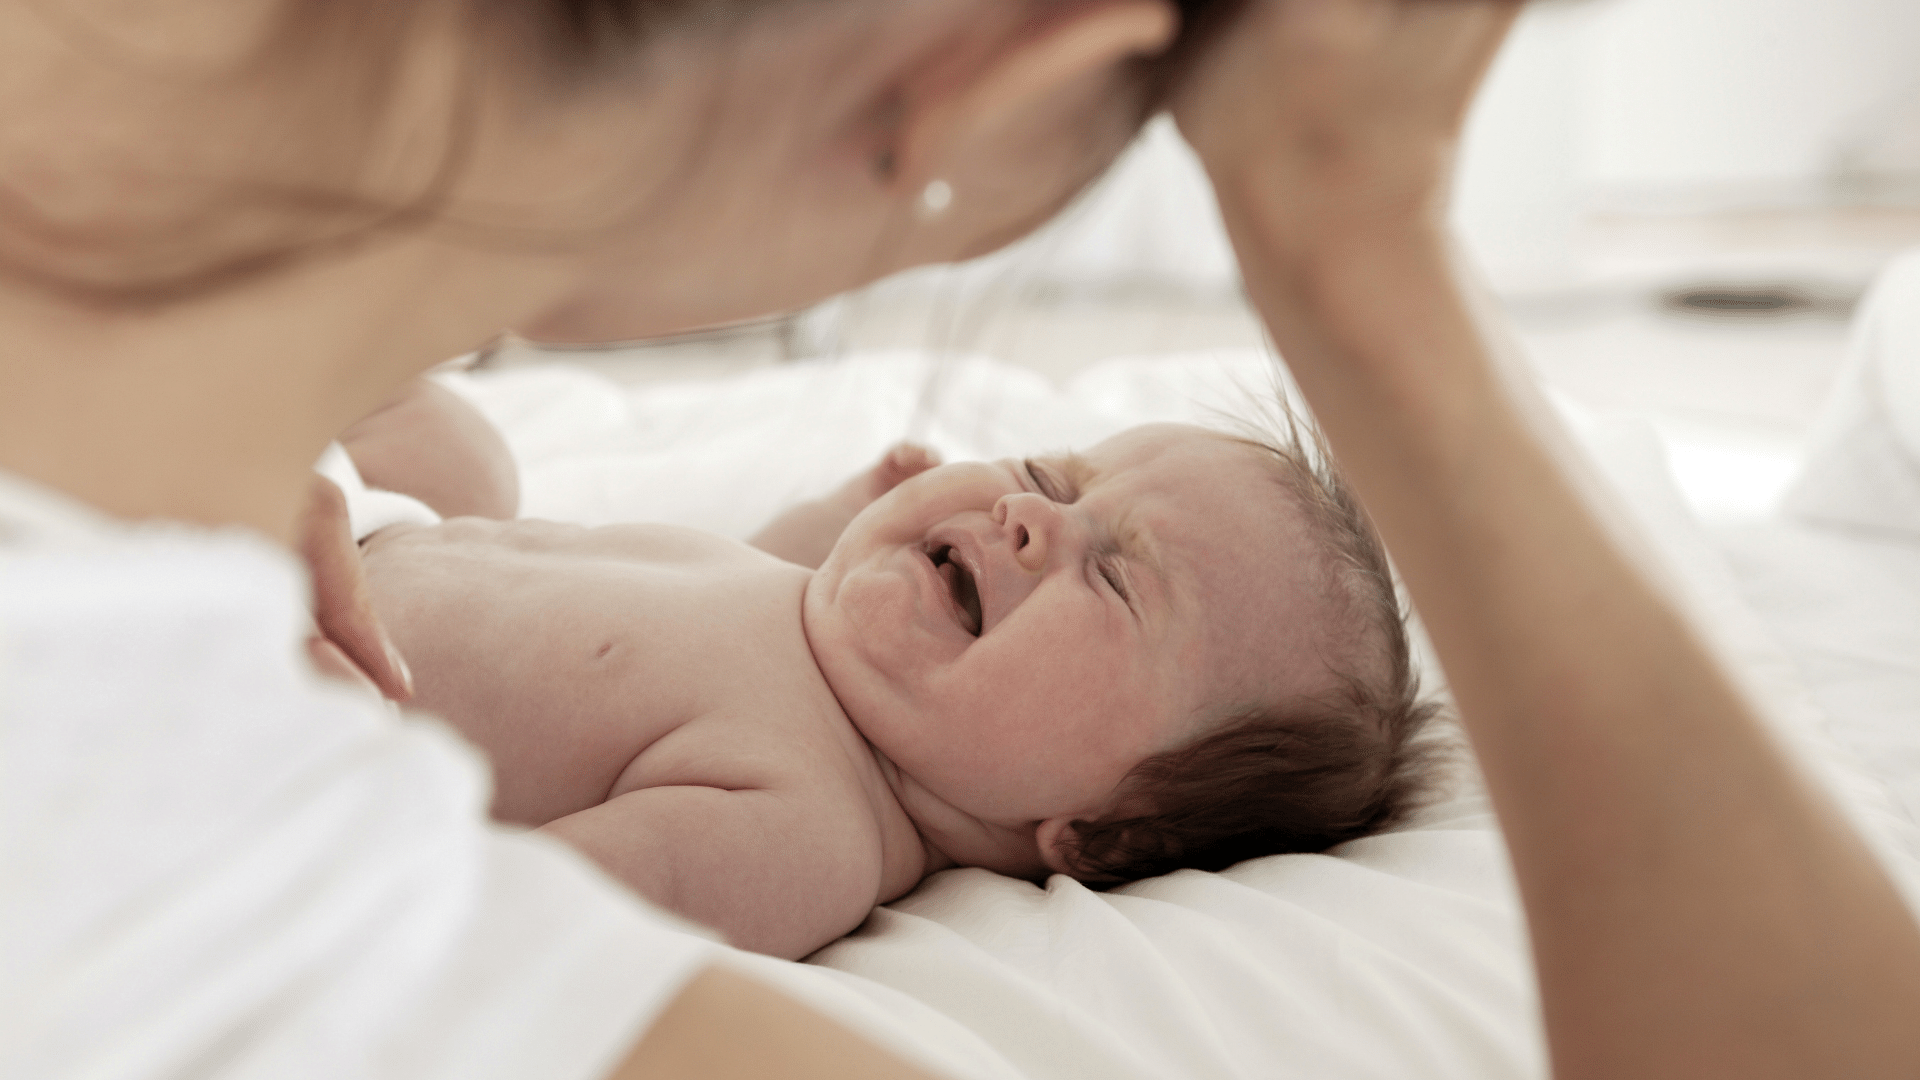 infant cries during nursing, baby crying during breastfeeding, newborn fussiness while nursing, baby fussing during feeding